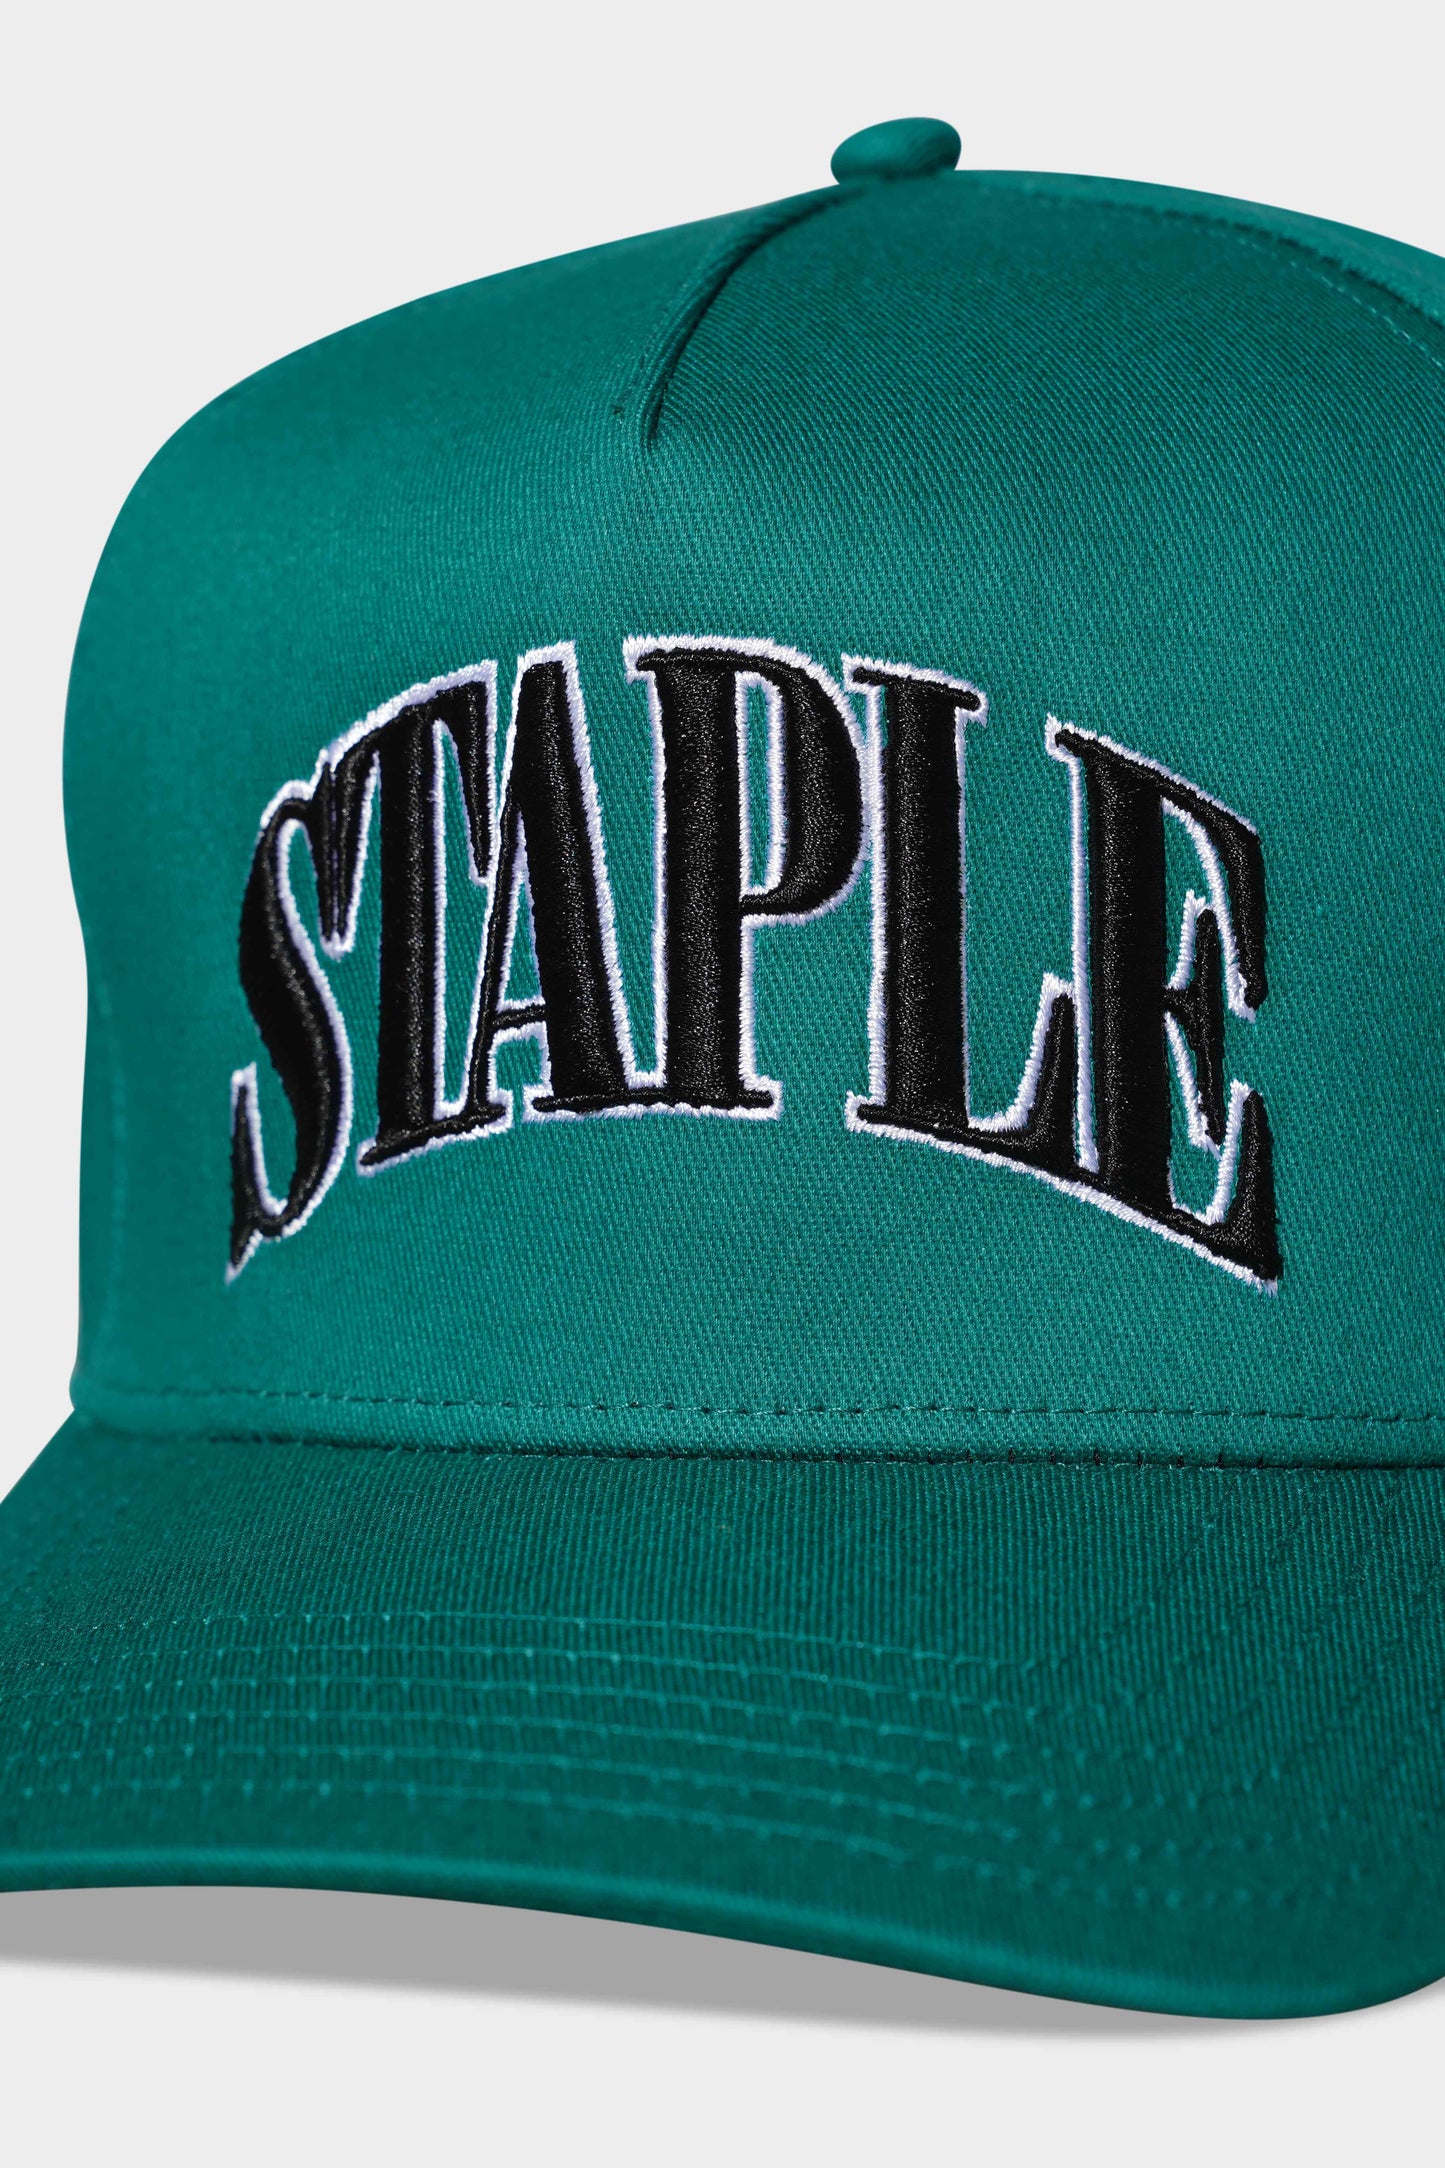 Staple 3D Arched Snapback Green/White/Black